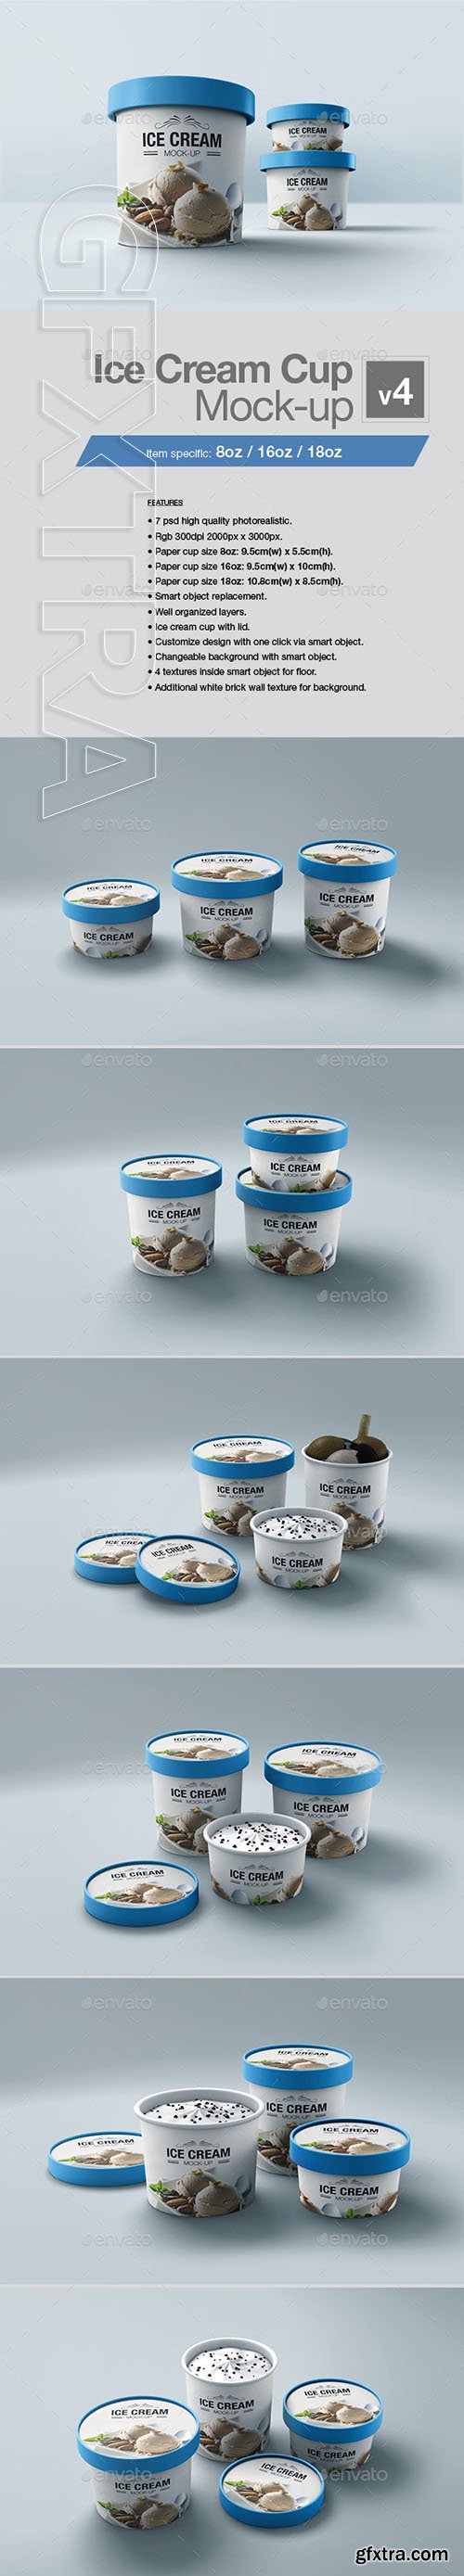 GraphicRiver - Ice Cream Cup Mock-up v4 22738227